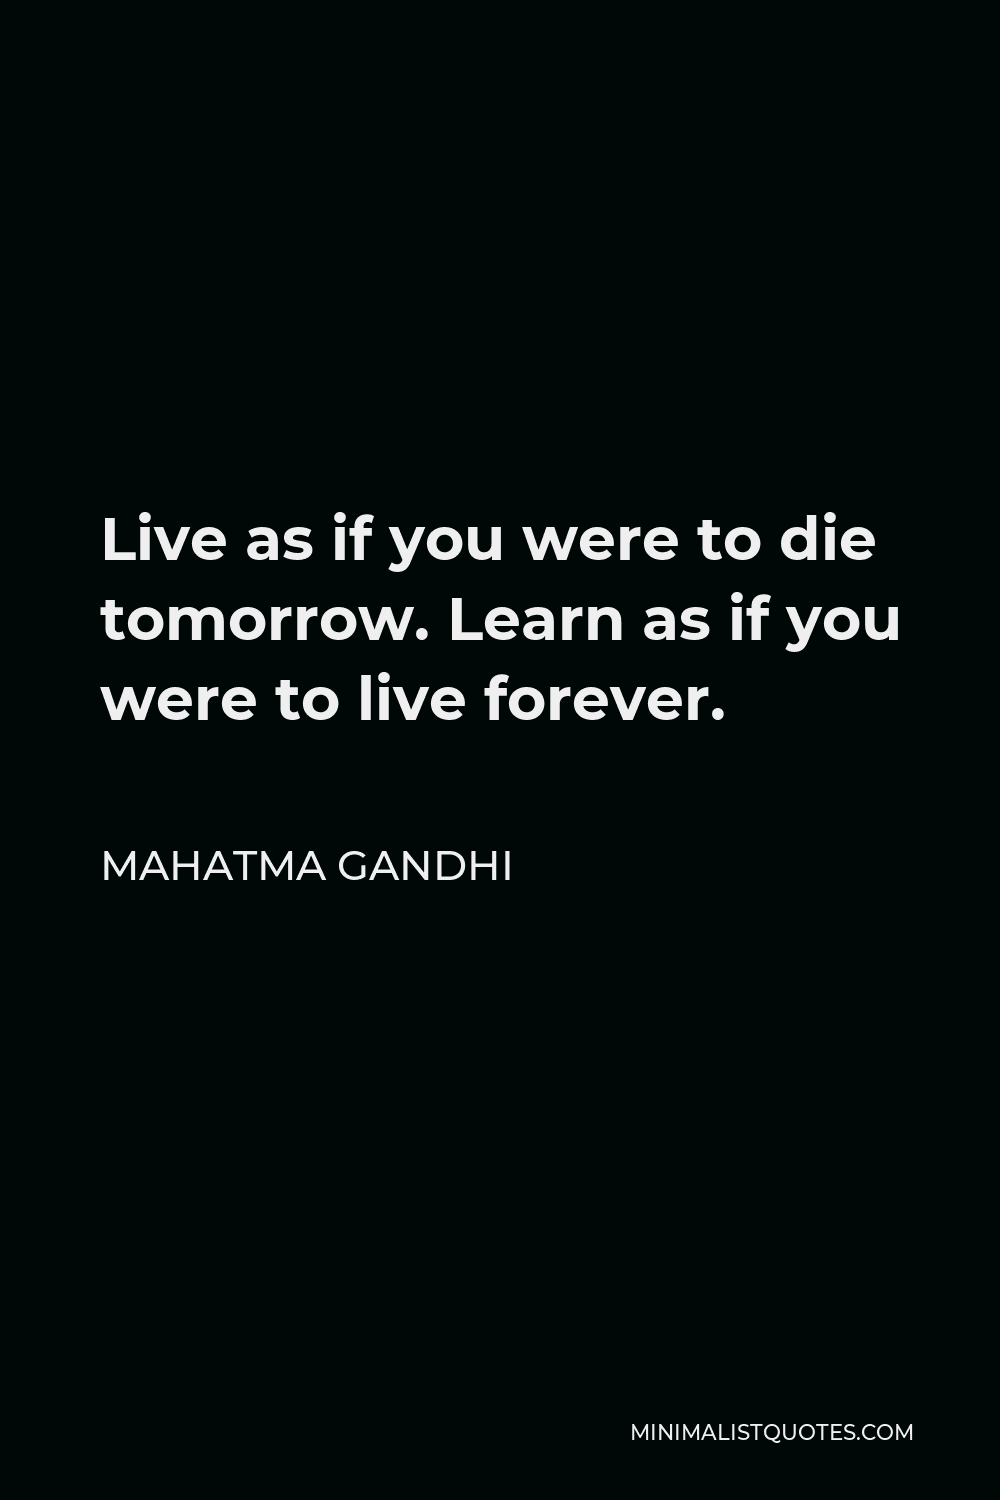 Mahatma Gandhi Quote: Live as if you were to die tomorrow. Learn as if ...